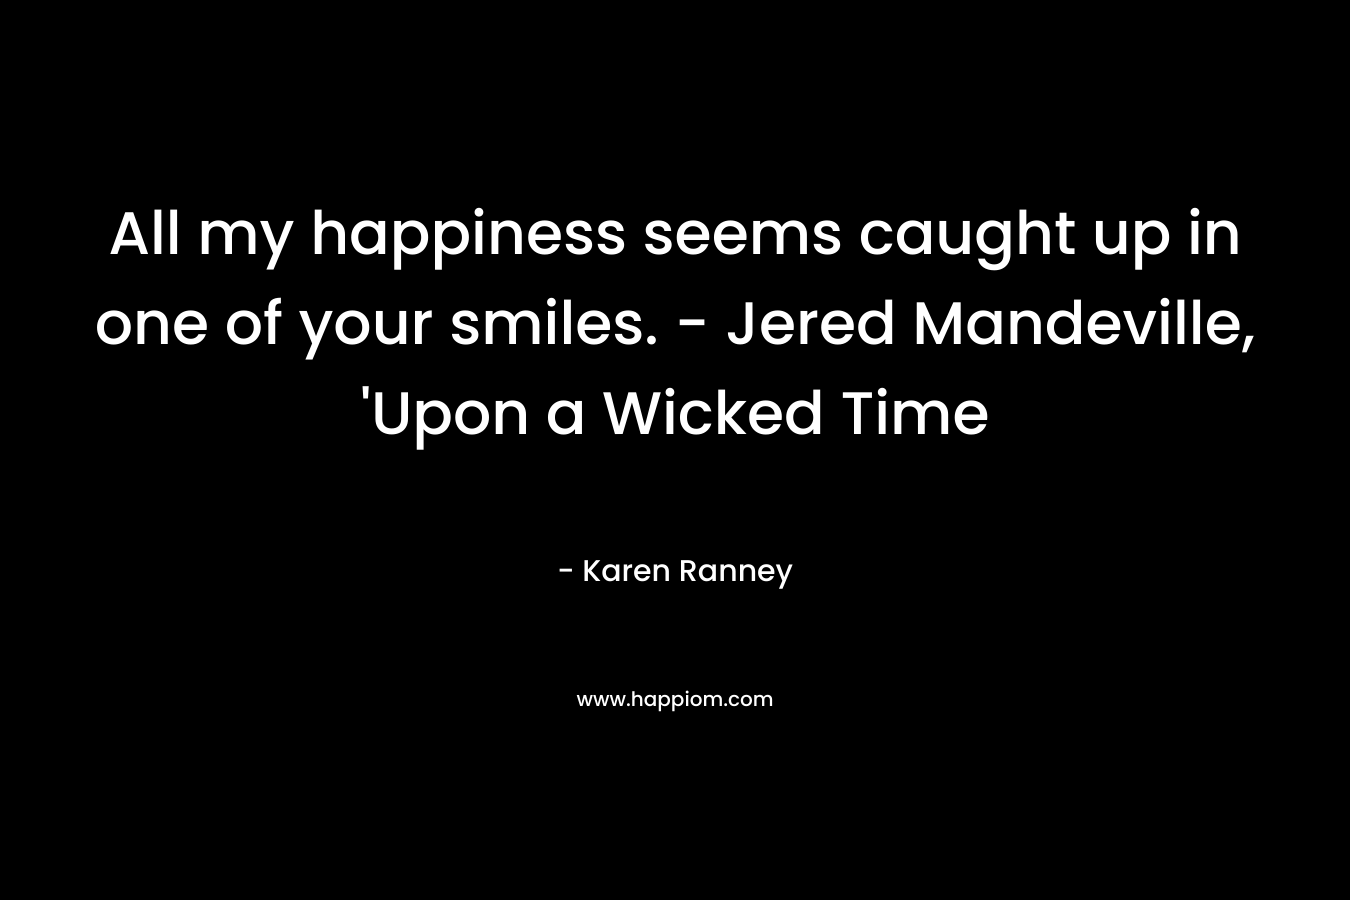 All my happiness seems caught up in one of your smiles. – Jered Mandeville, ‘Upon a Wicked Time – Karen Ranney